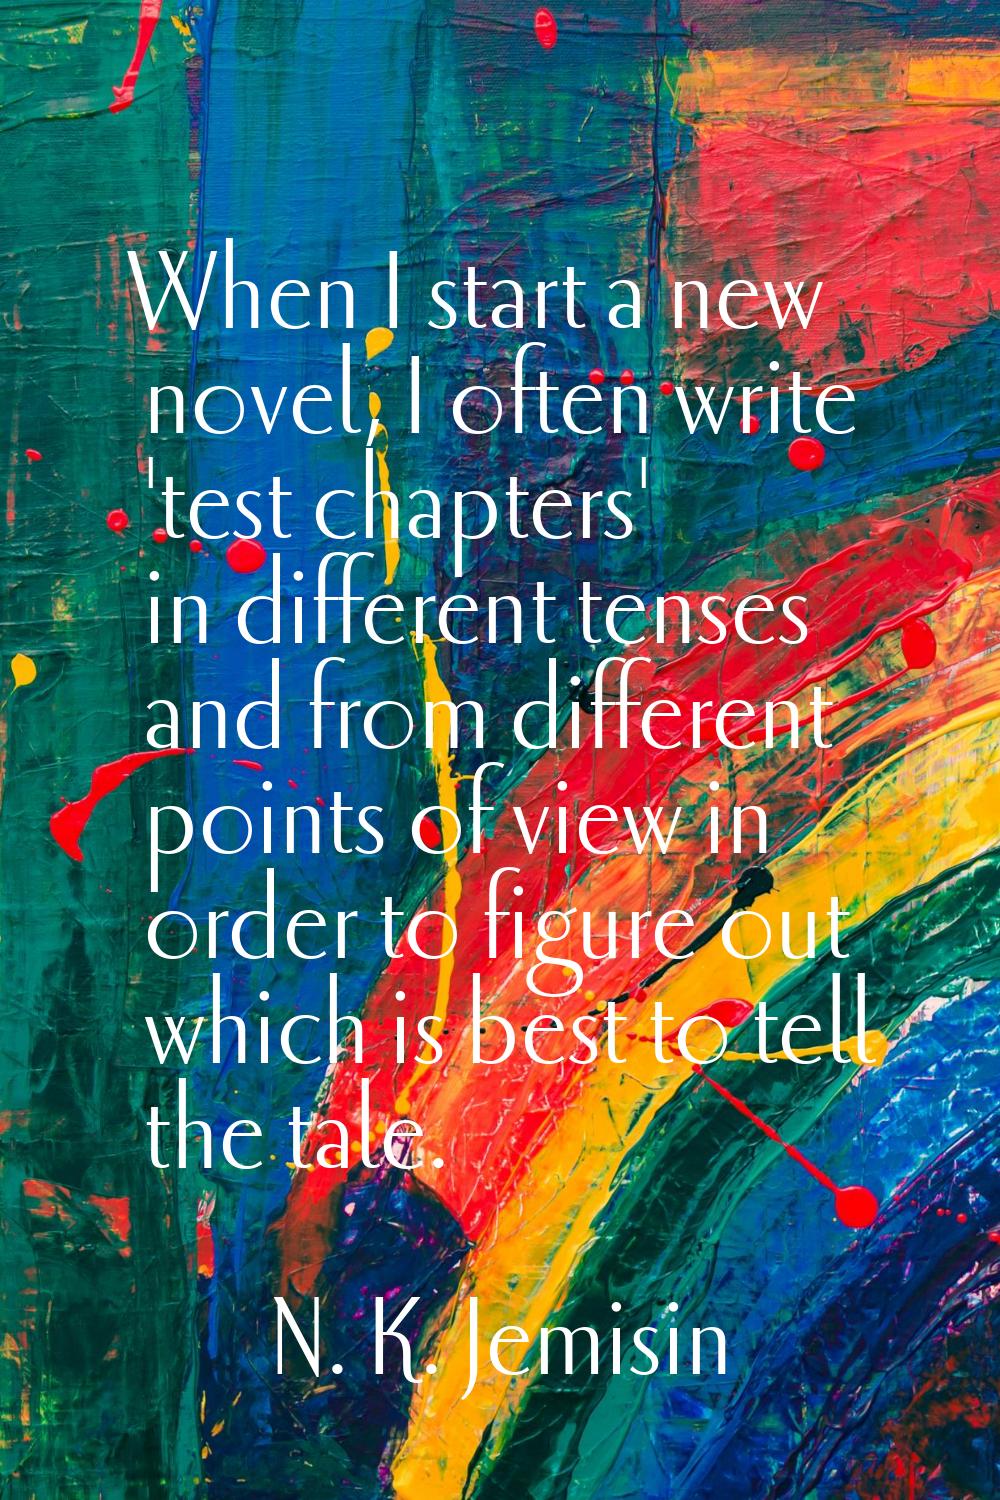 When I start a new novel, I often write 'test chapters' in different tenses and from different poin